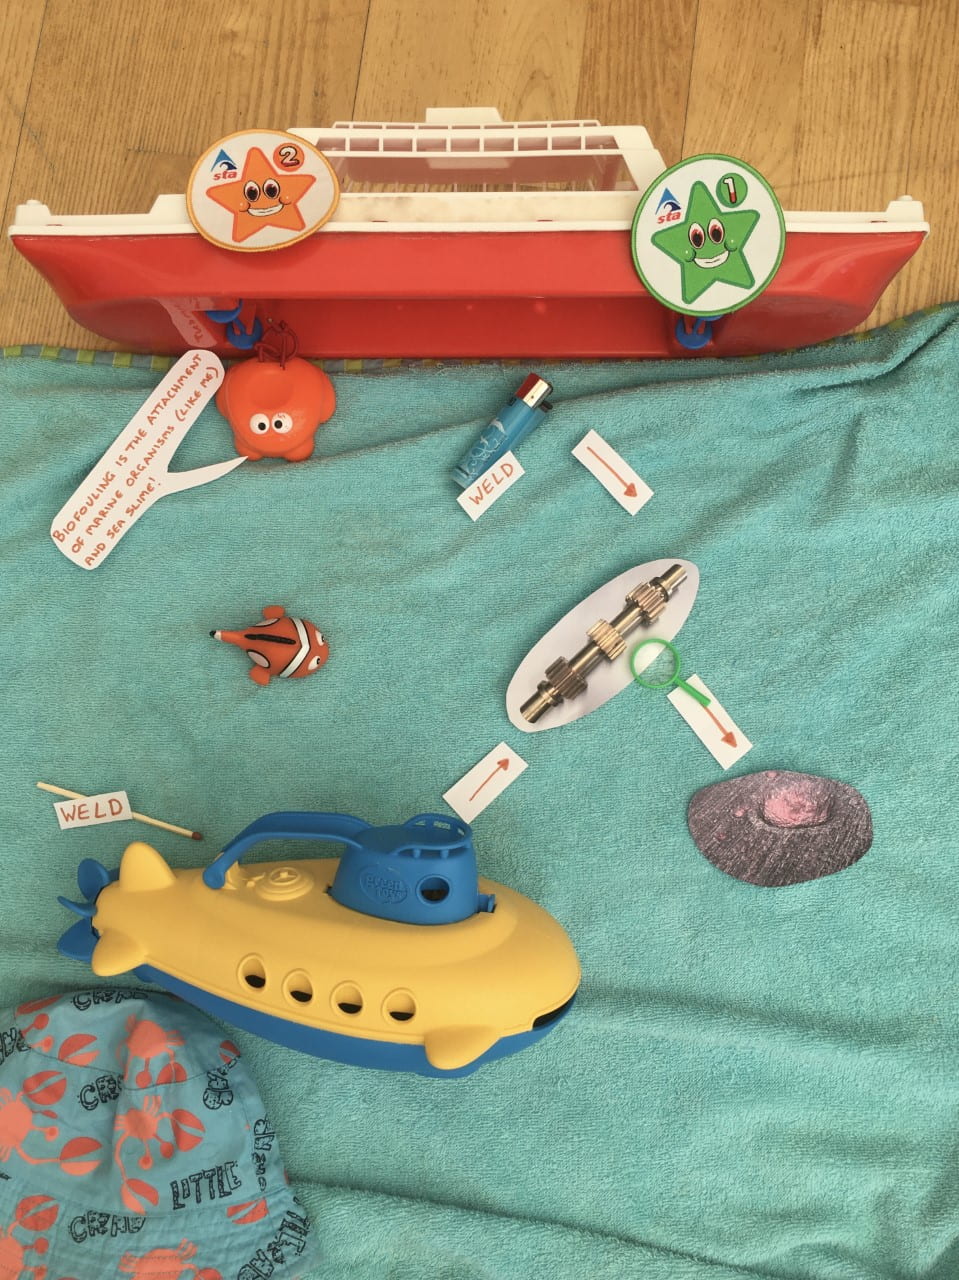 A toy boat with a towel beneath it. On top of the towel, which is intended to look like the sea, are: a lighter (labelled 'weld'); a toy frog (which is saying 'biofouling is the attachment of marine organisms (like me) and sea slime!); some toy fish; a metal gear; a toy submarine; a shell. Next to the submarine is a match (labelled 'weld').